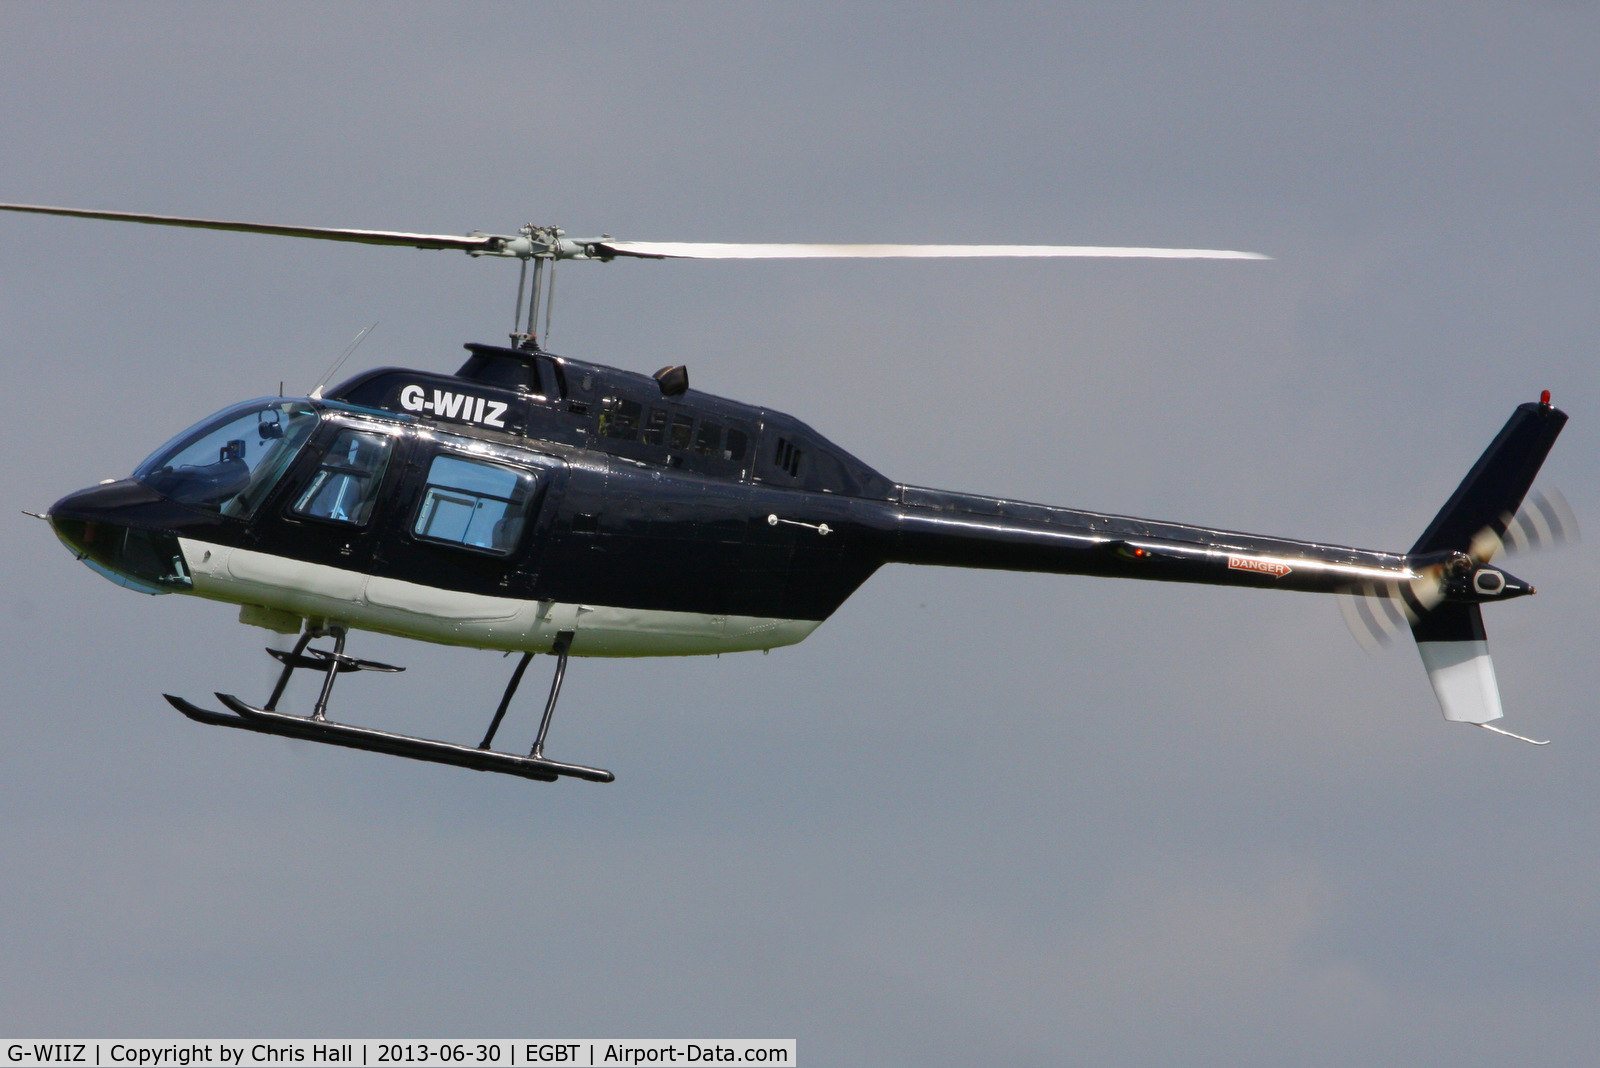 G-WIIZ, 1969 Agusta AB-206B JetRanger II C/N 8111, being used for ferrying race fans to the British F1 Grand Prix at Silverstone